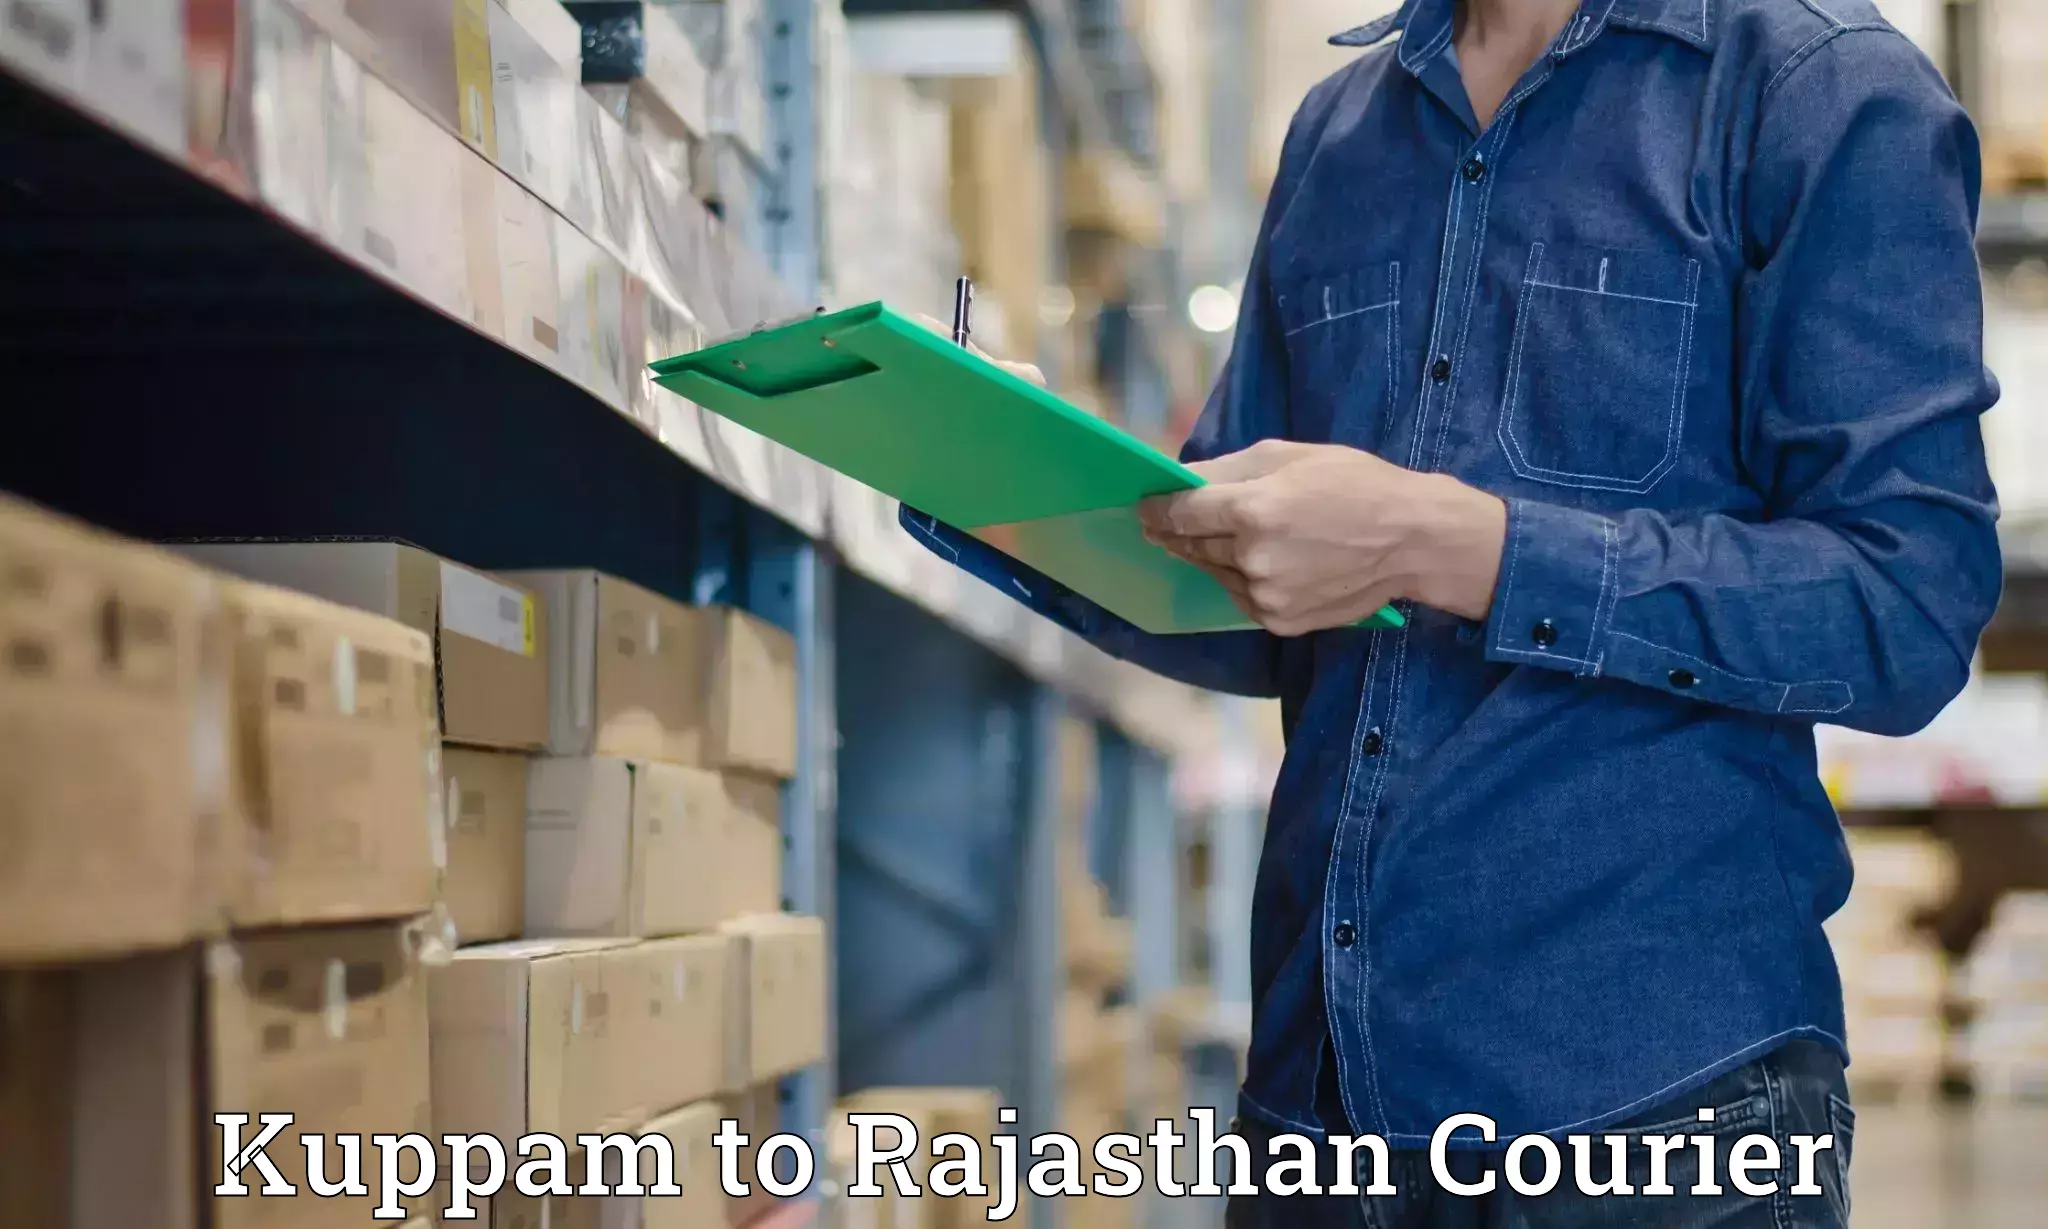 Pharmaceutical courier Kuppam to Yeswanthapur